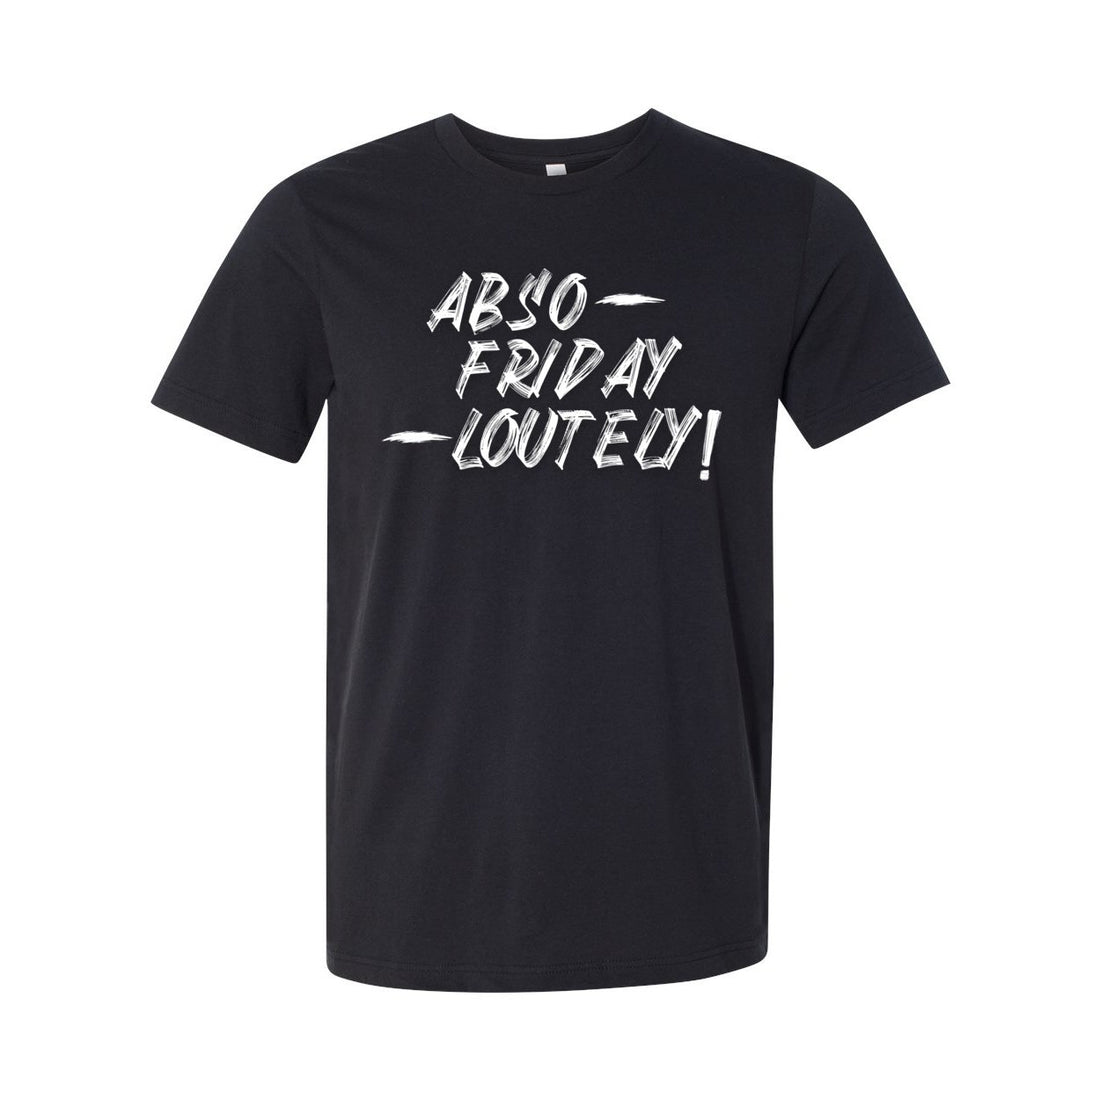 Abso-Friday Short Sleeve Jersey Tee - T-Shirts - Positively Sassy - Abso-Friday Short Sleeve Jersey Tee